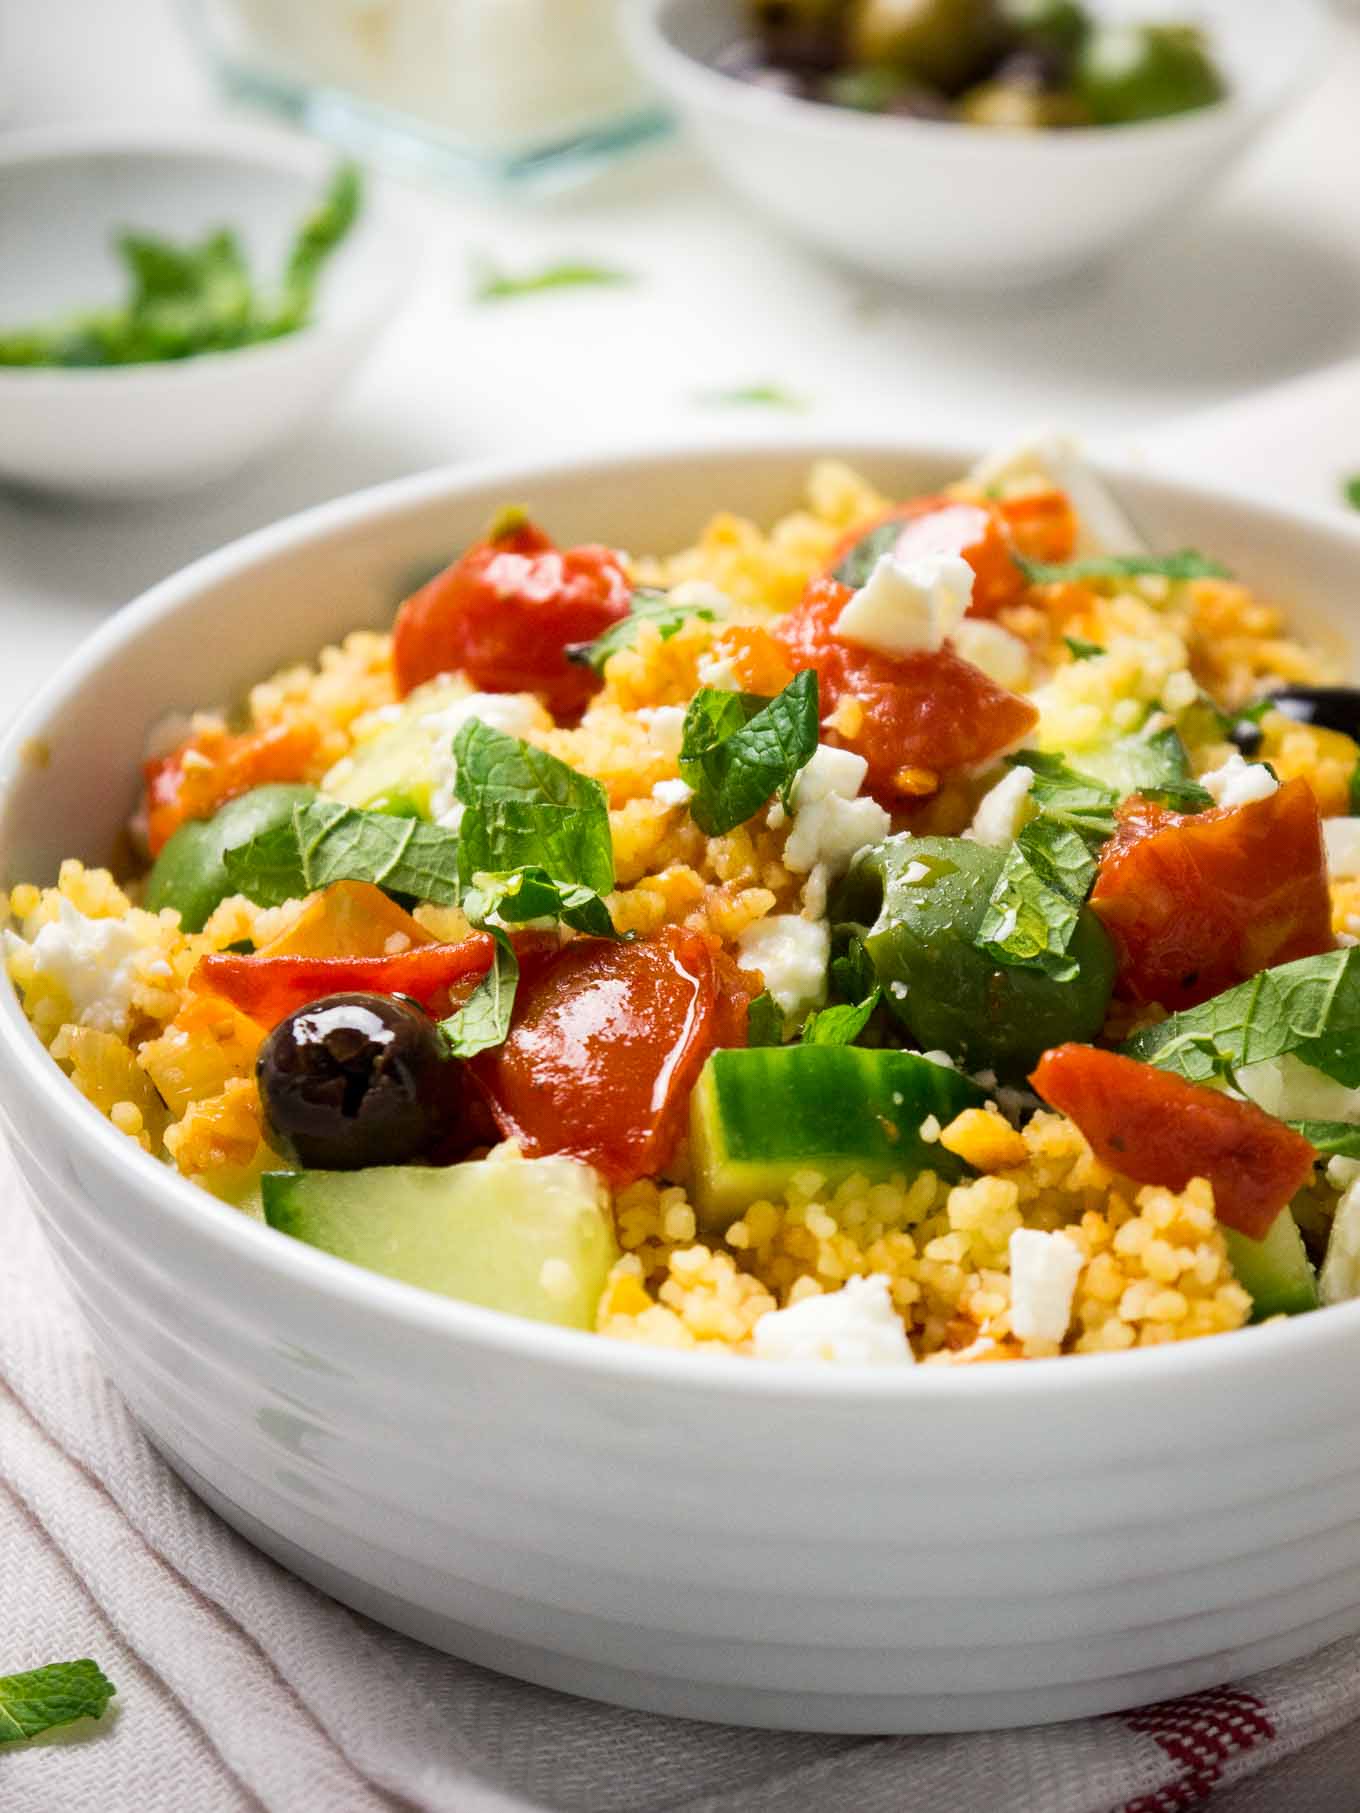 20-minute Greek Couscous Salad makes a great quick weeknight dinner but it's also perfect for parties! This easy recipe is sure to be a crowd-pleaser.